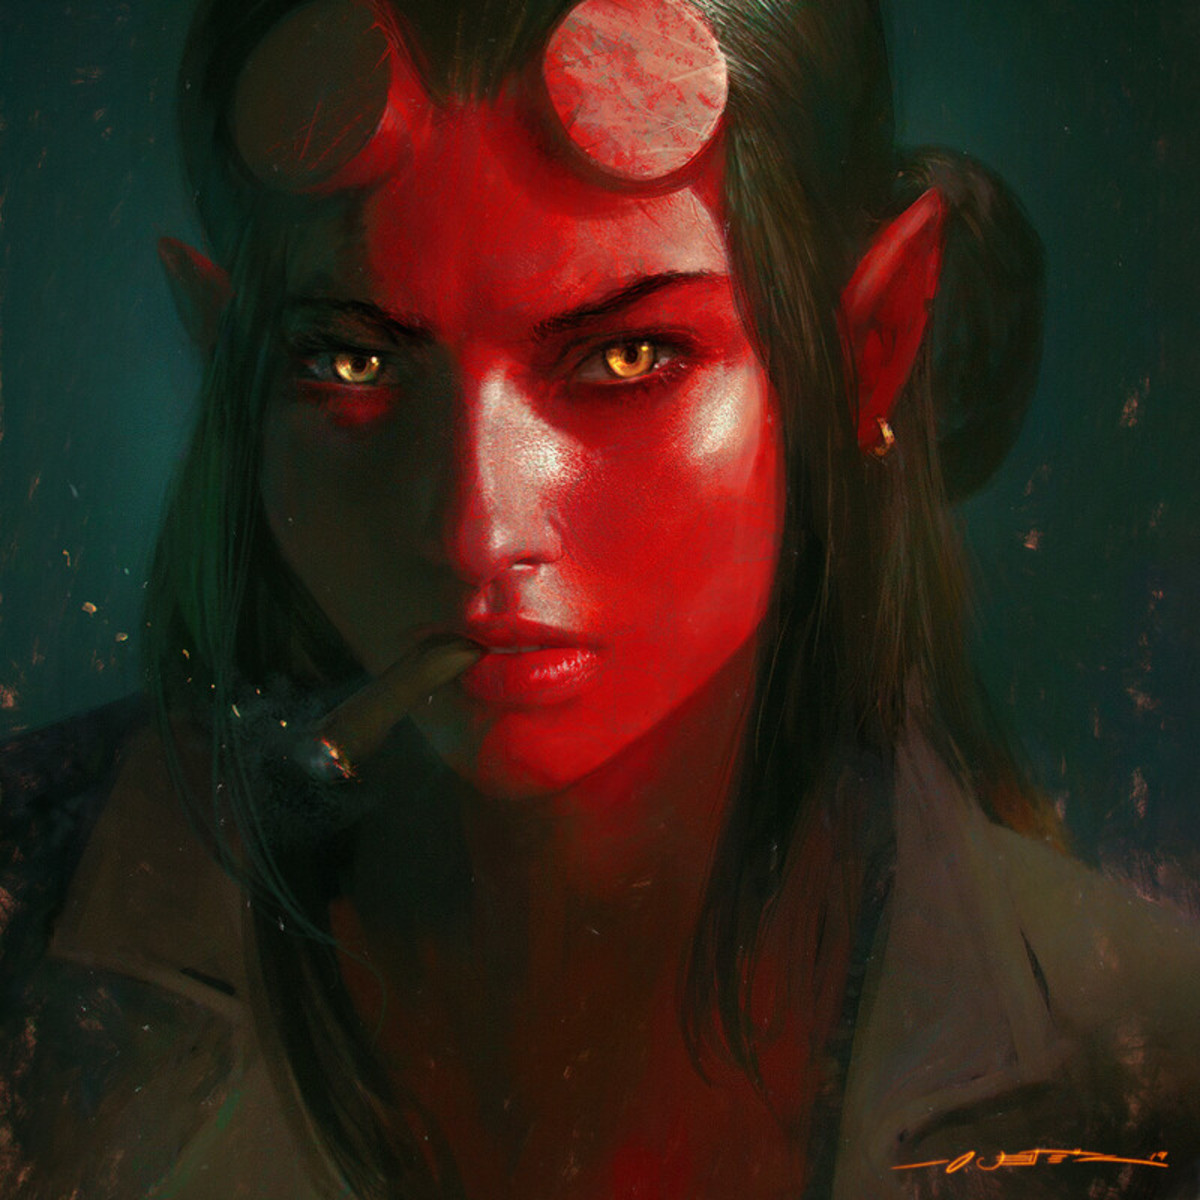 hellgirl. join list: ArtAttack (372 subs)Mention History.. I feel it goes against the character to be cute...